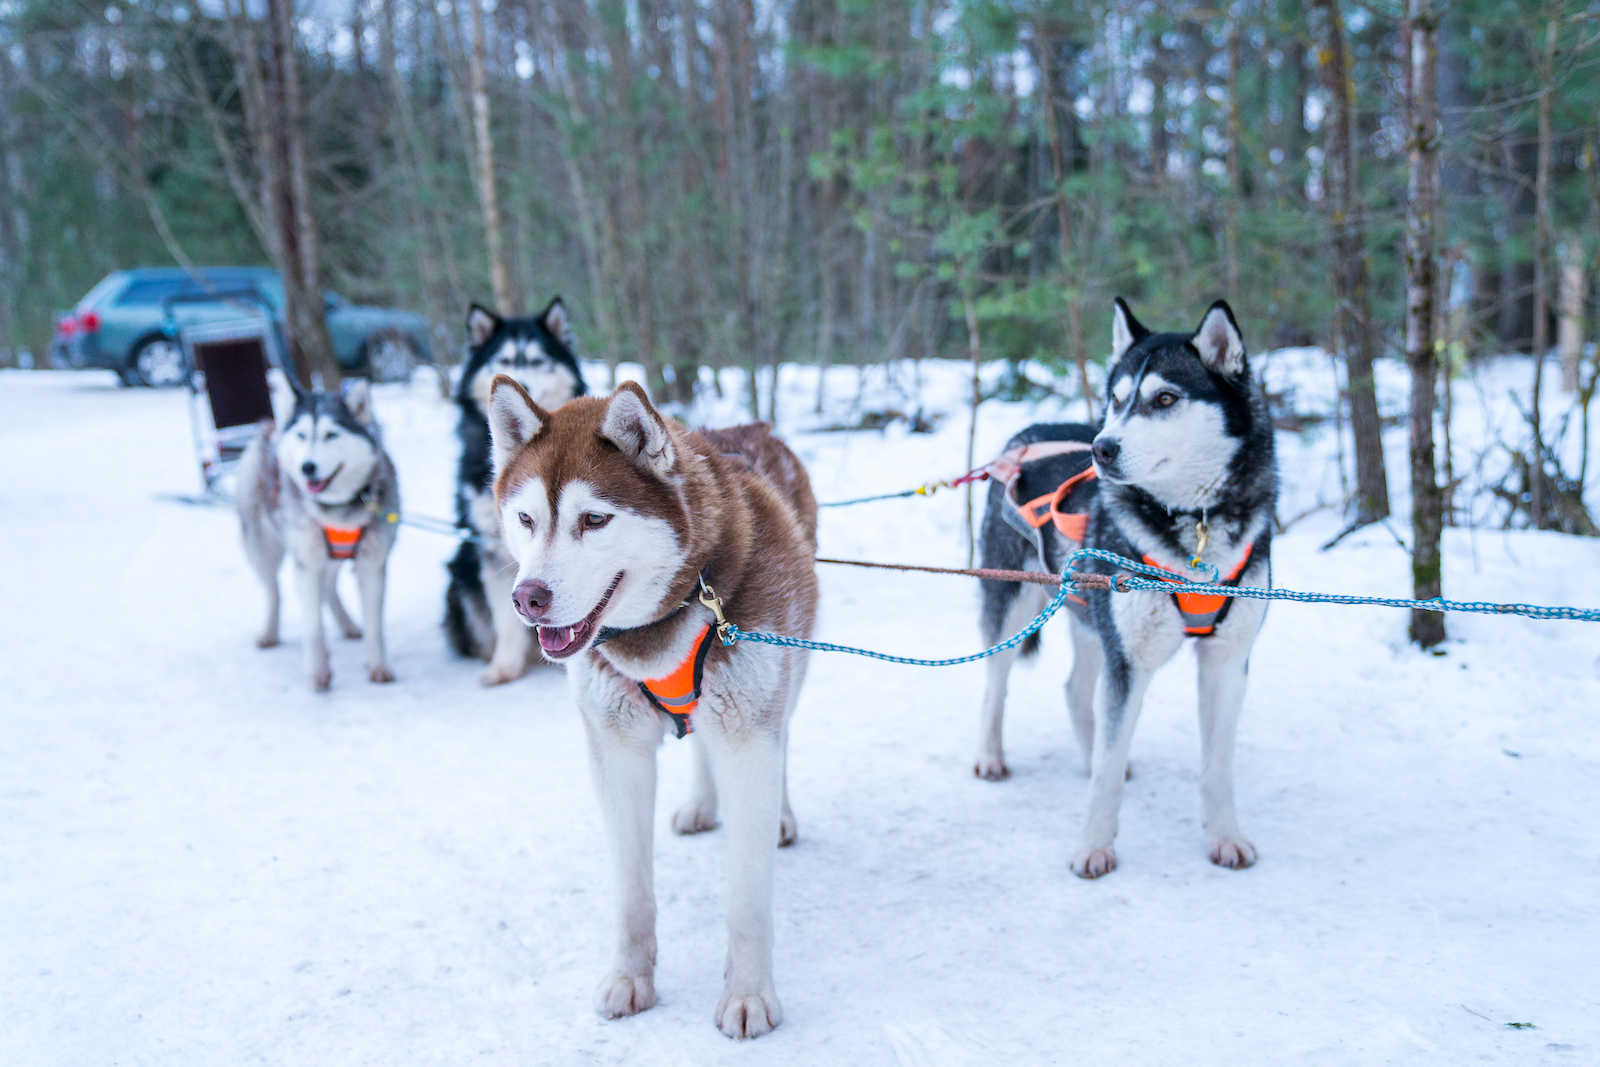 Types of Huskies: All at one place